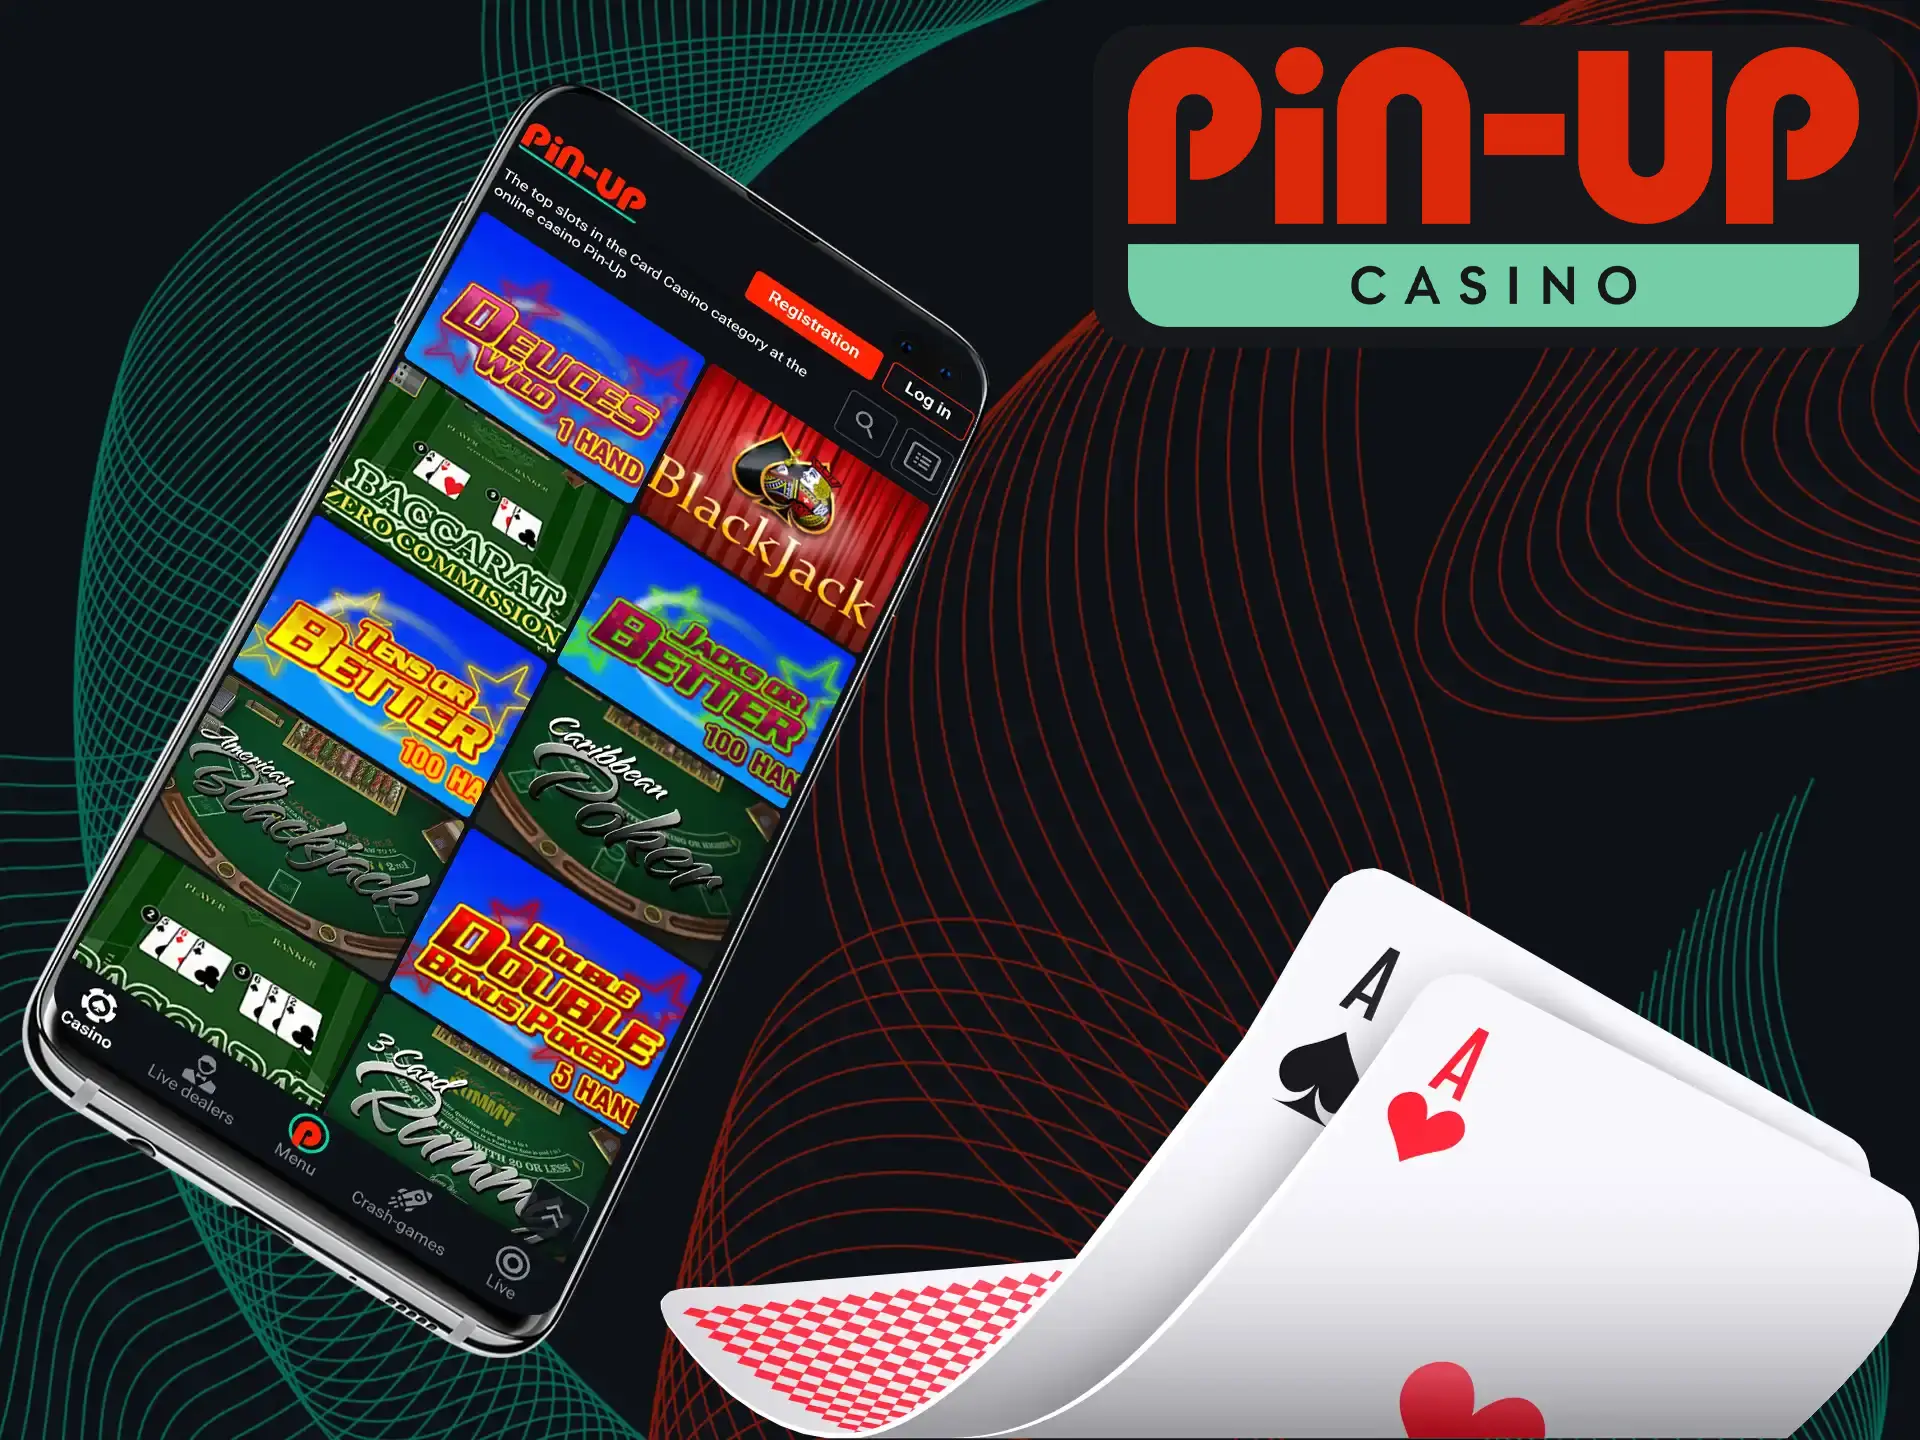 Play the most popular card game in the casino in slot or live mode at Pin-Up Casino.